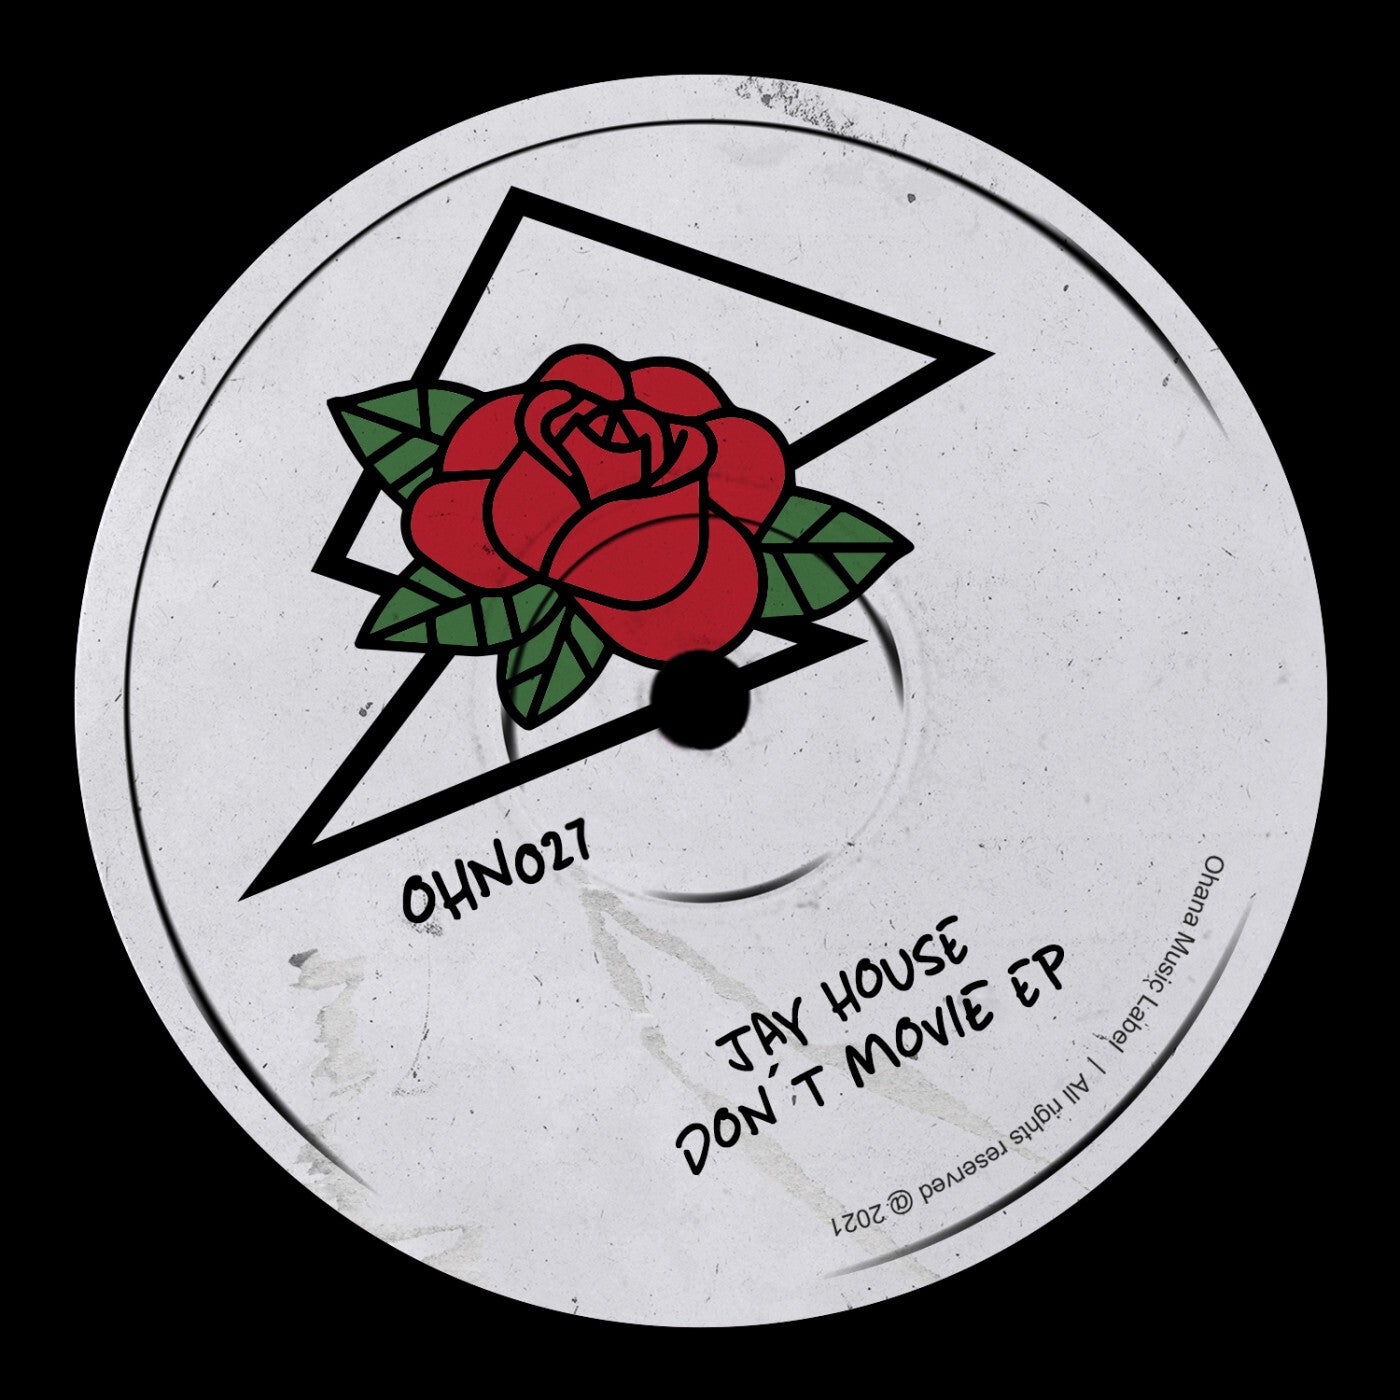 Don't Movie EP